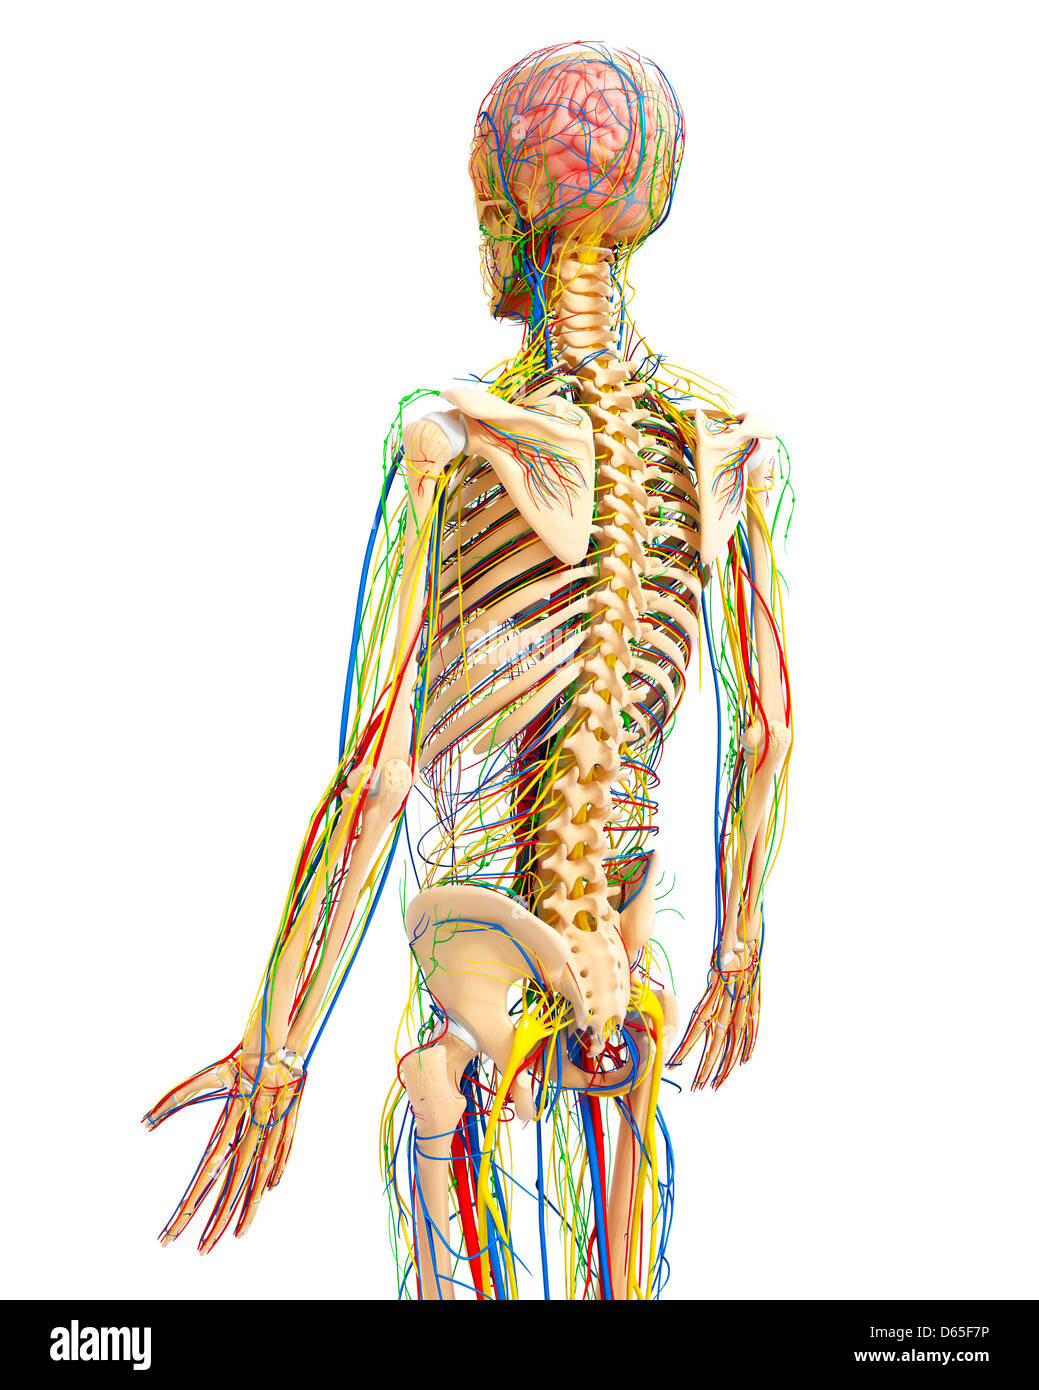 Anatomy Rear View Back Human High Resolution Stock Photography and